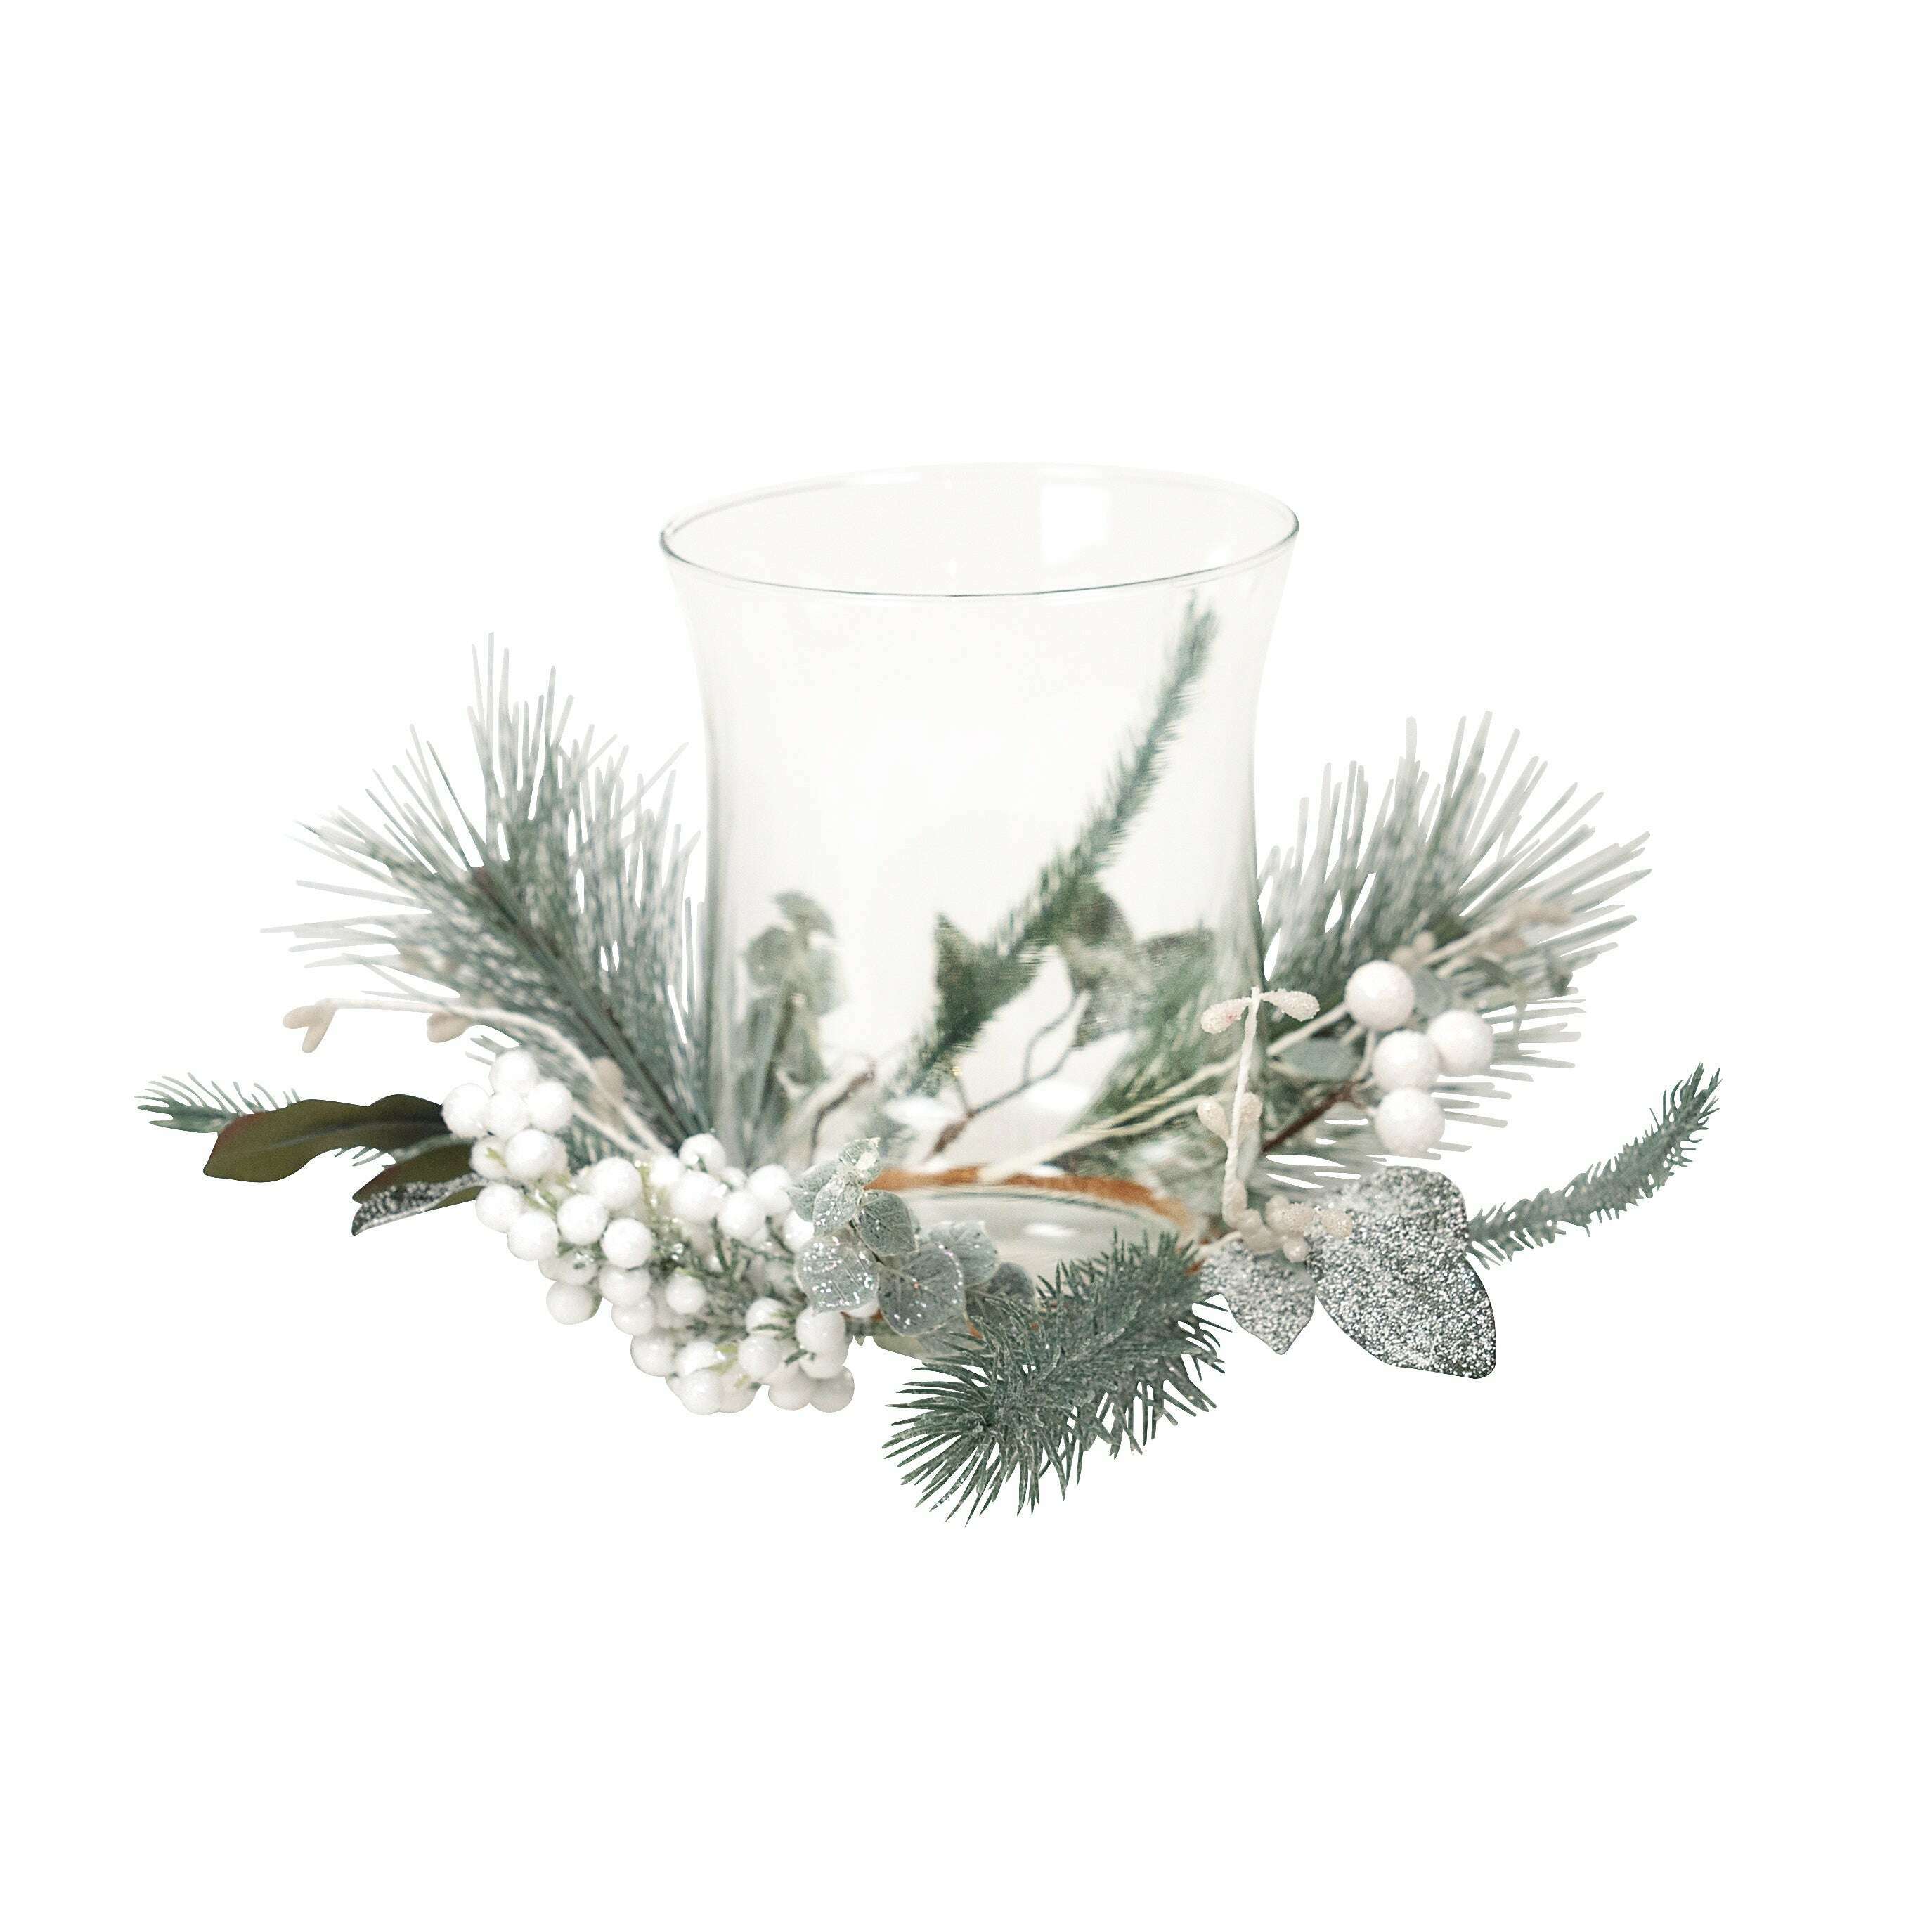 Impodimo Living & Giving:Sage White Berry Wreath Hurricane:Swing Gifts:Large